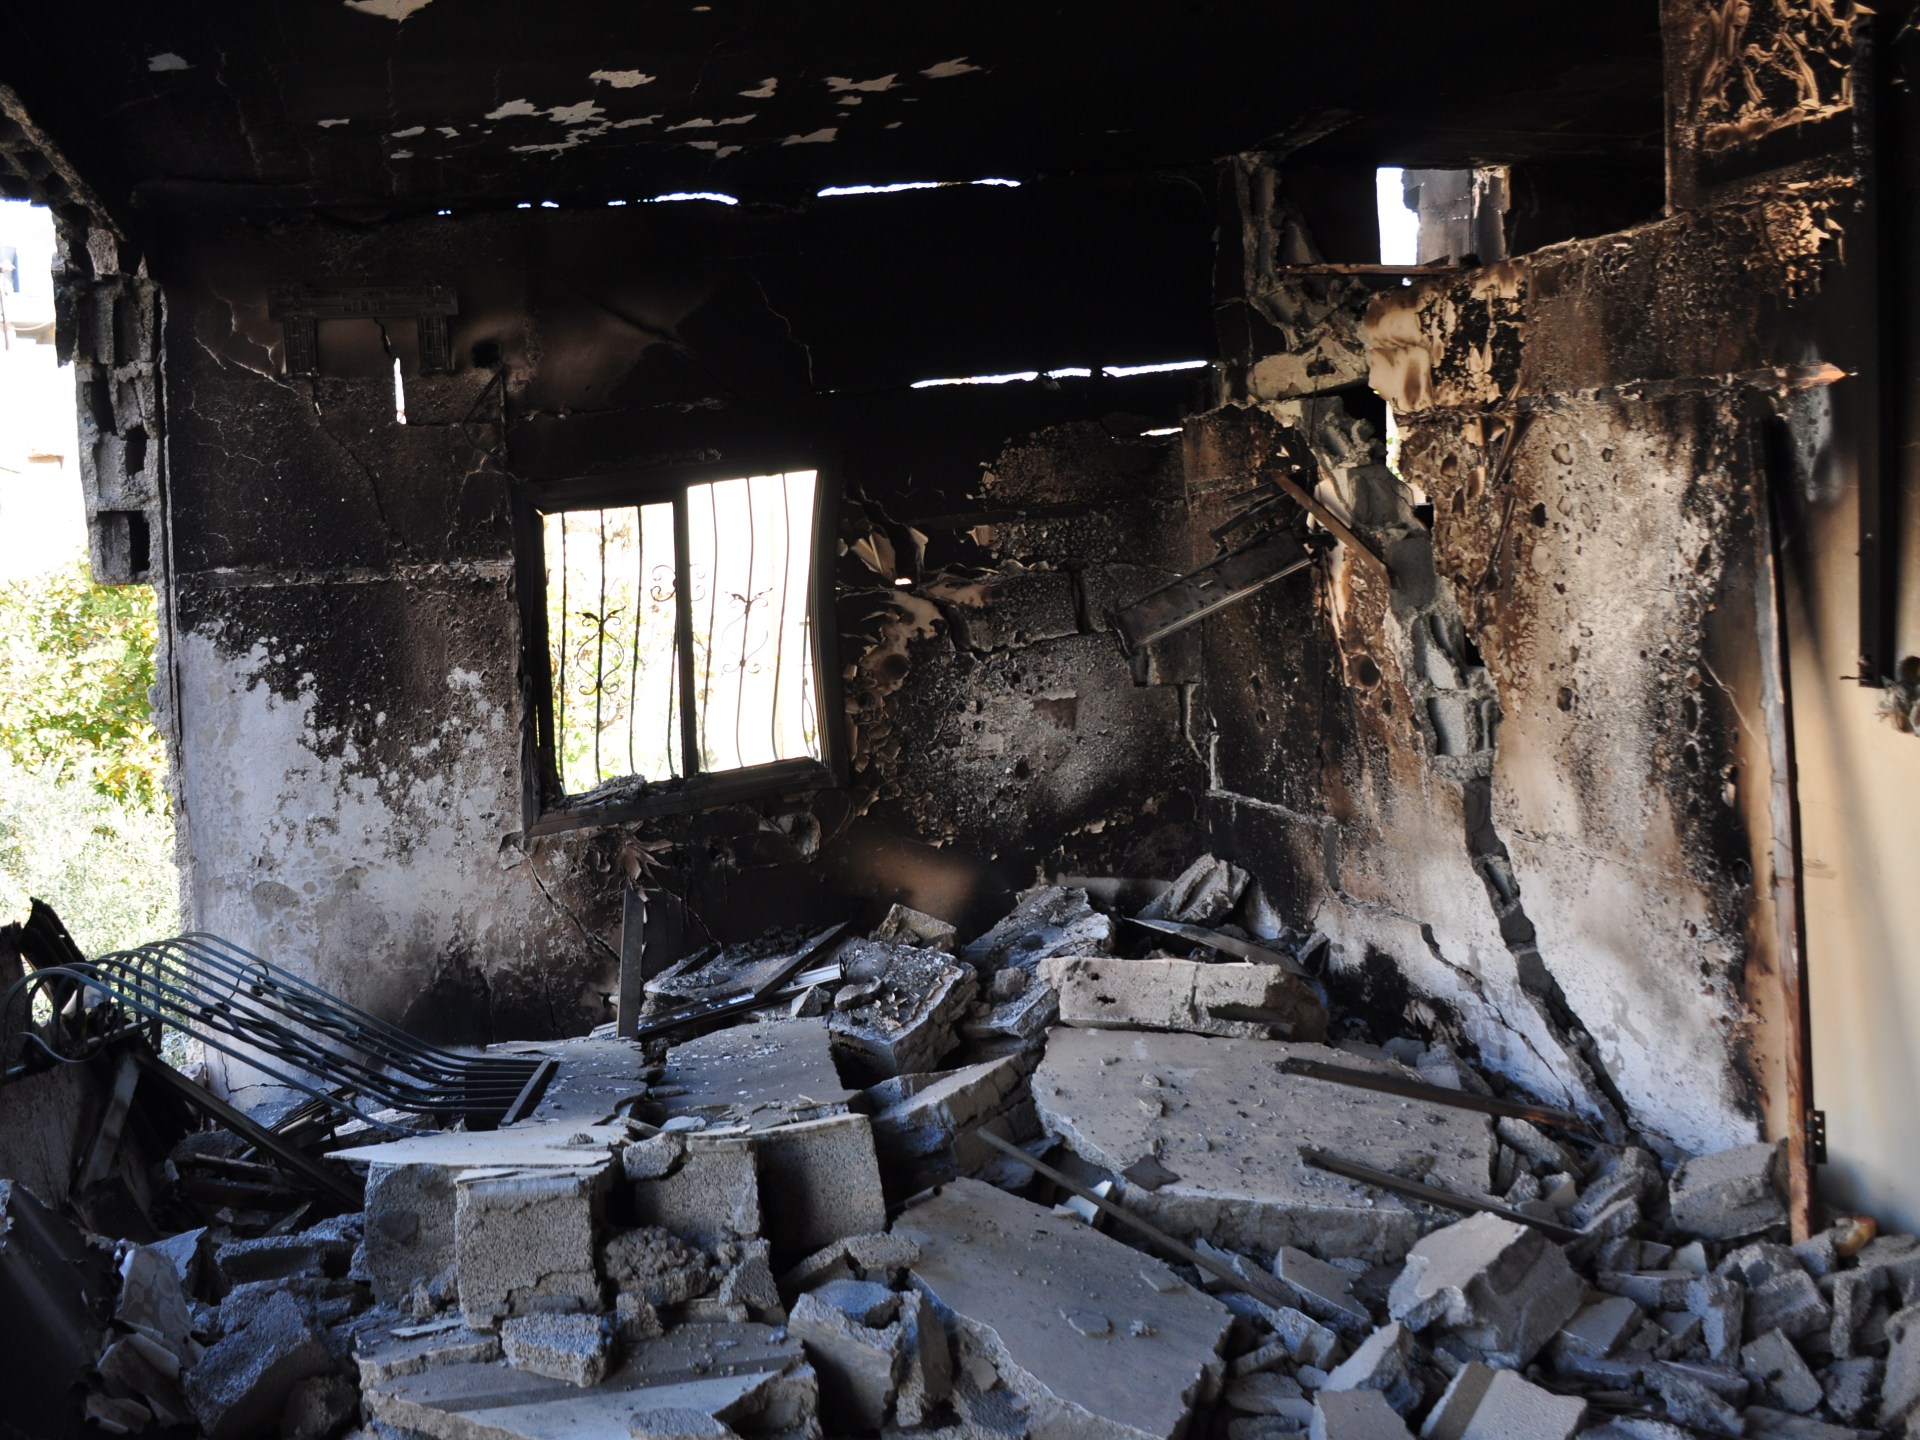 Photos: Images of destruction left behind by Israel in Jenin